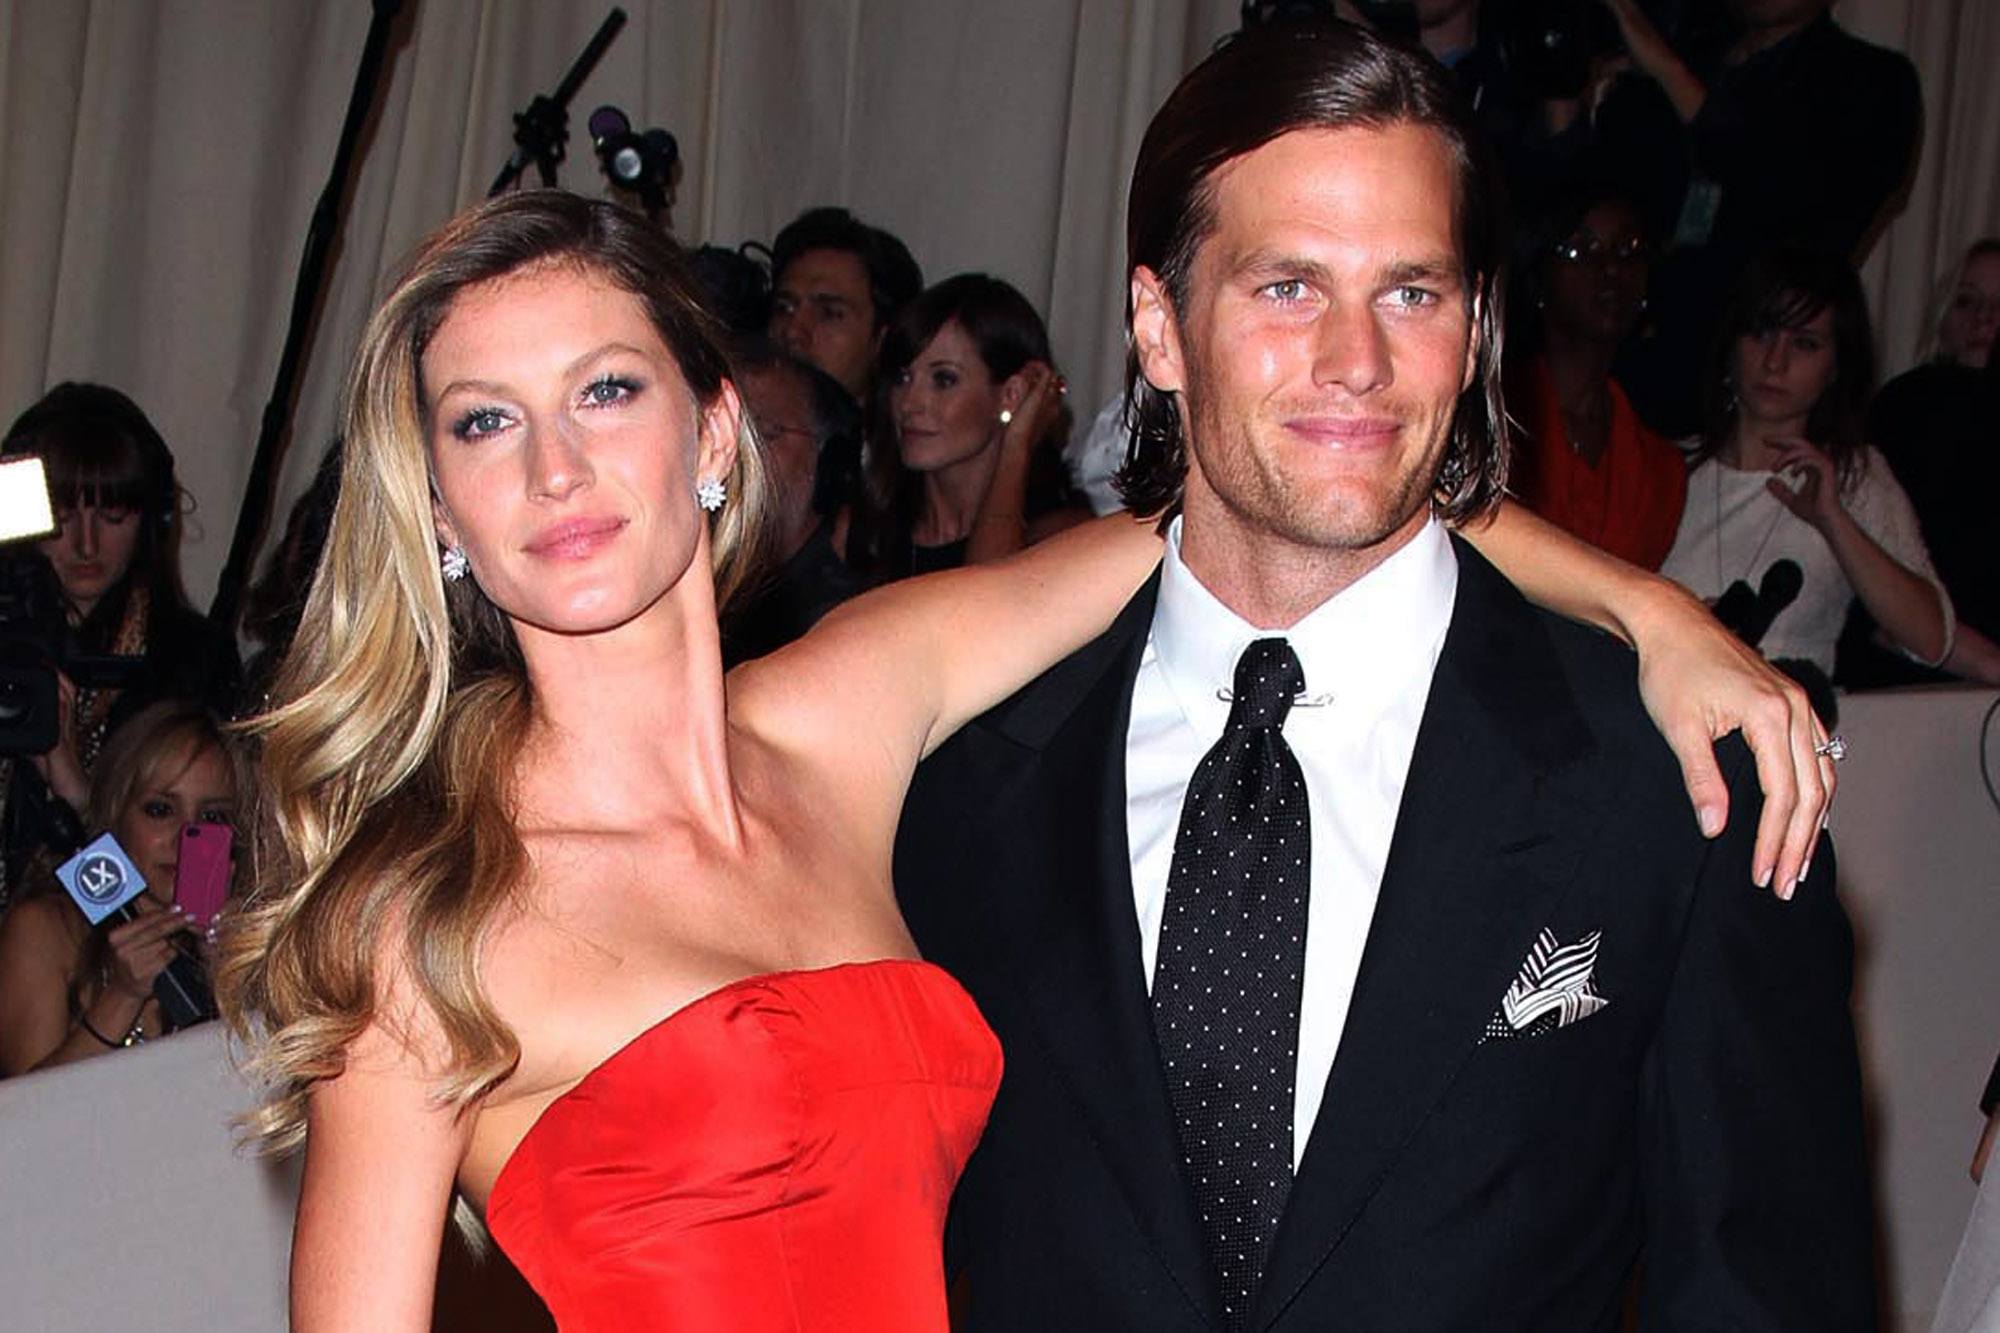 FLAWED: The Tom Brady and Giselle Bündchen Diet Plan